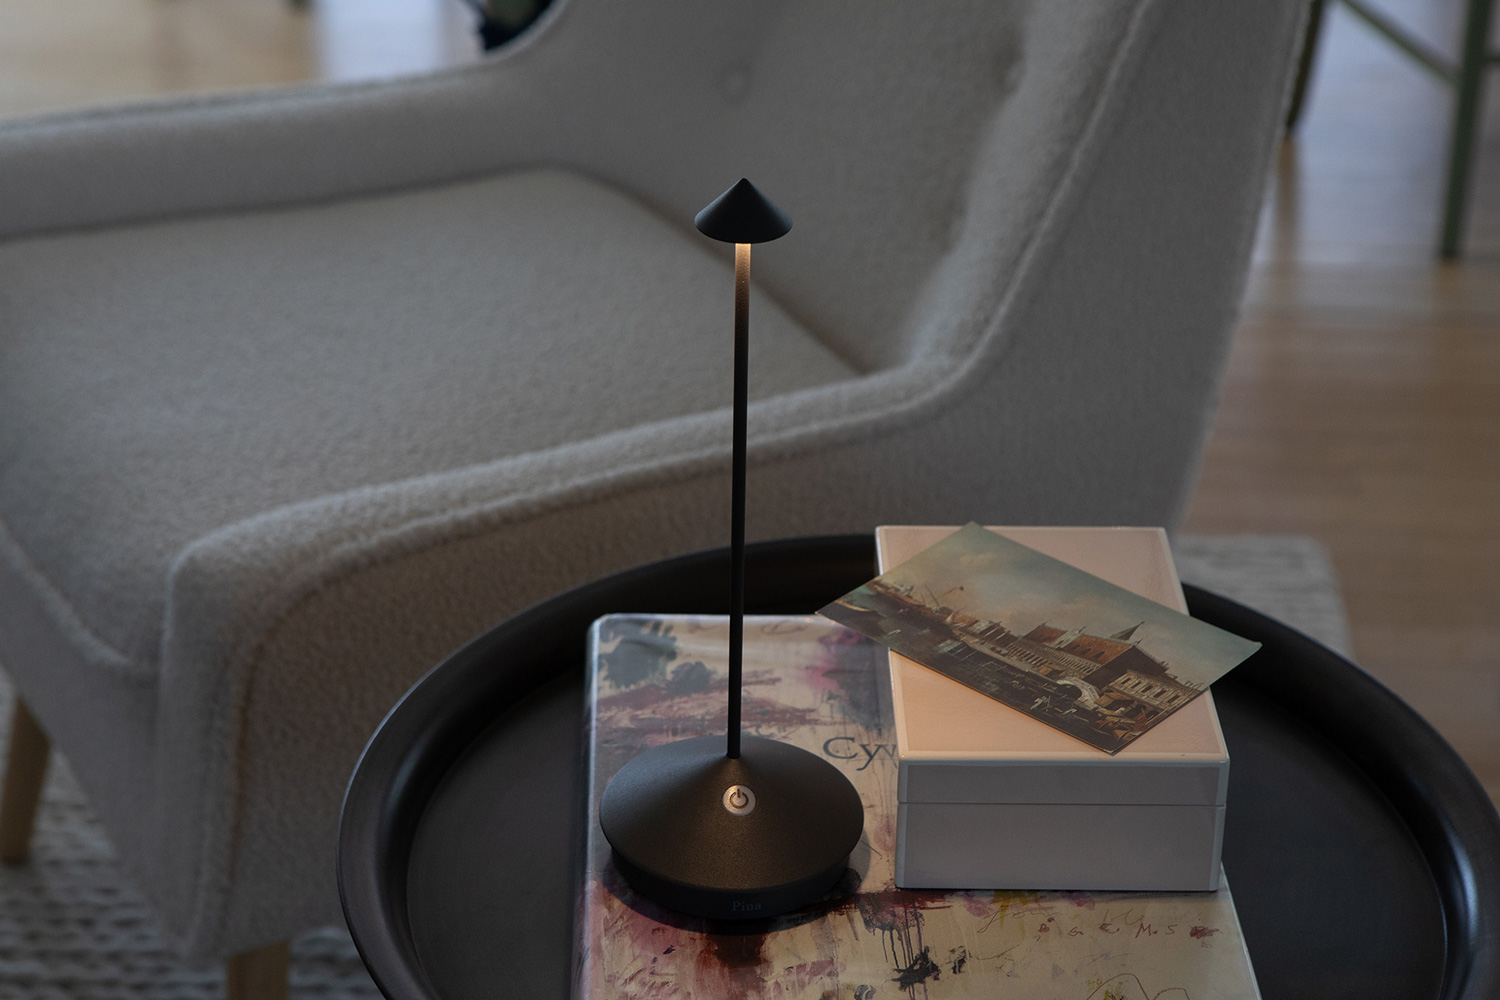 Pina Pro Rechargeable LED Table Lamp by Ai Lati Lights for reading and relaxing